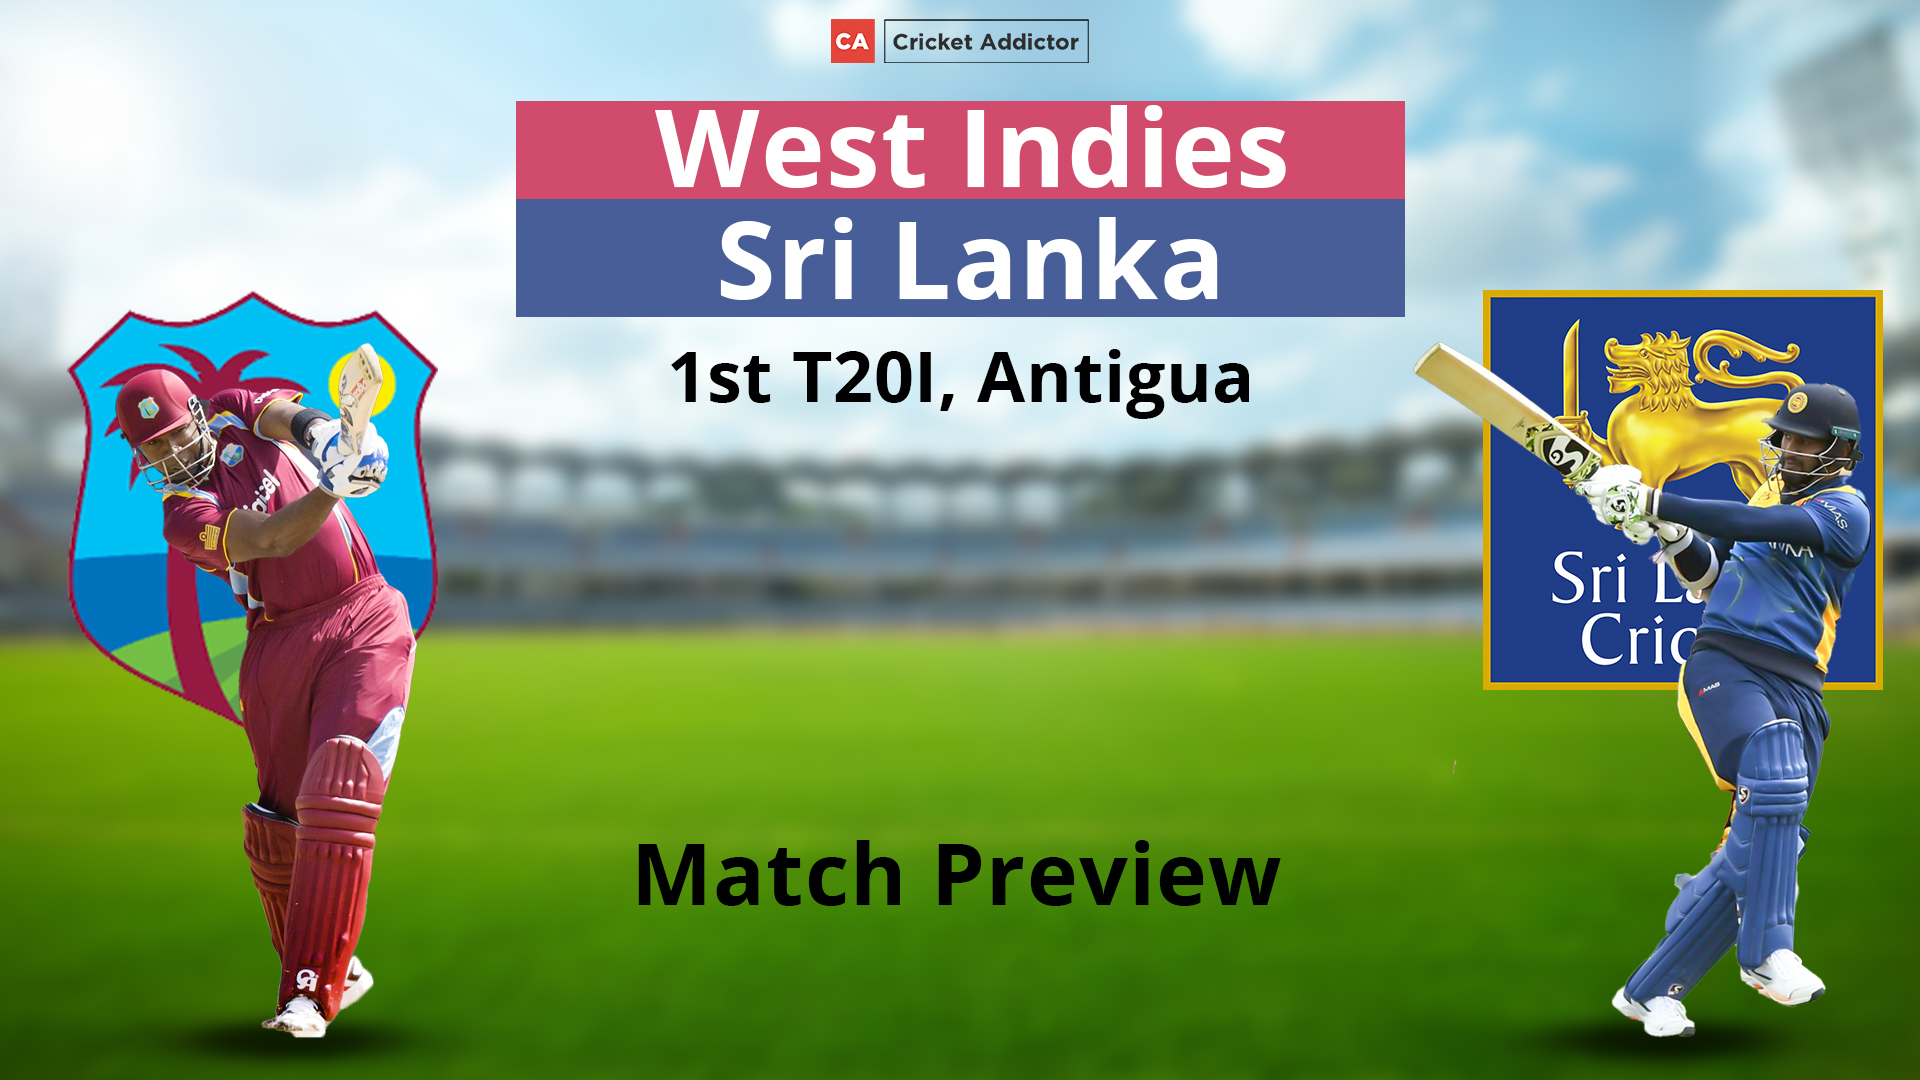 West Indies vs Sri Lanka 2021, 1st T20I: Match Preview And Prediction